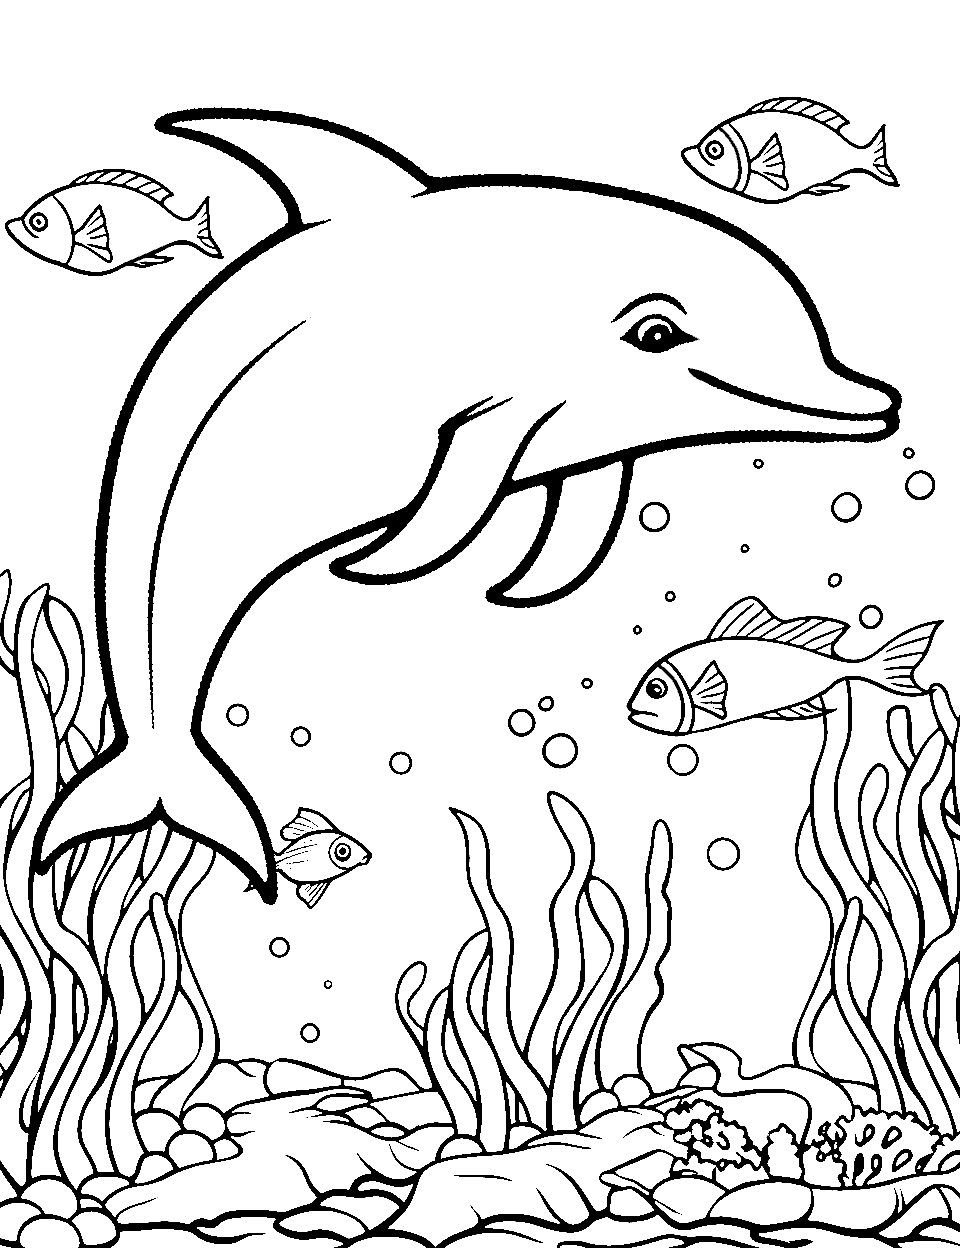 Dolphin and the Coral Reef Coloring Page - A dolphin serenely swimming near a vibrant yet simplistic coral reef.